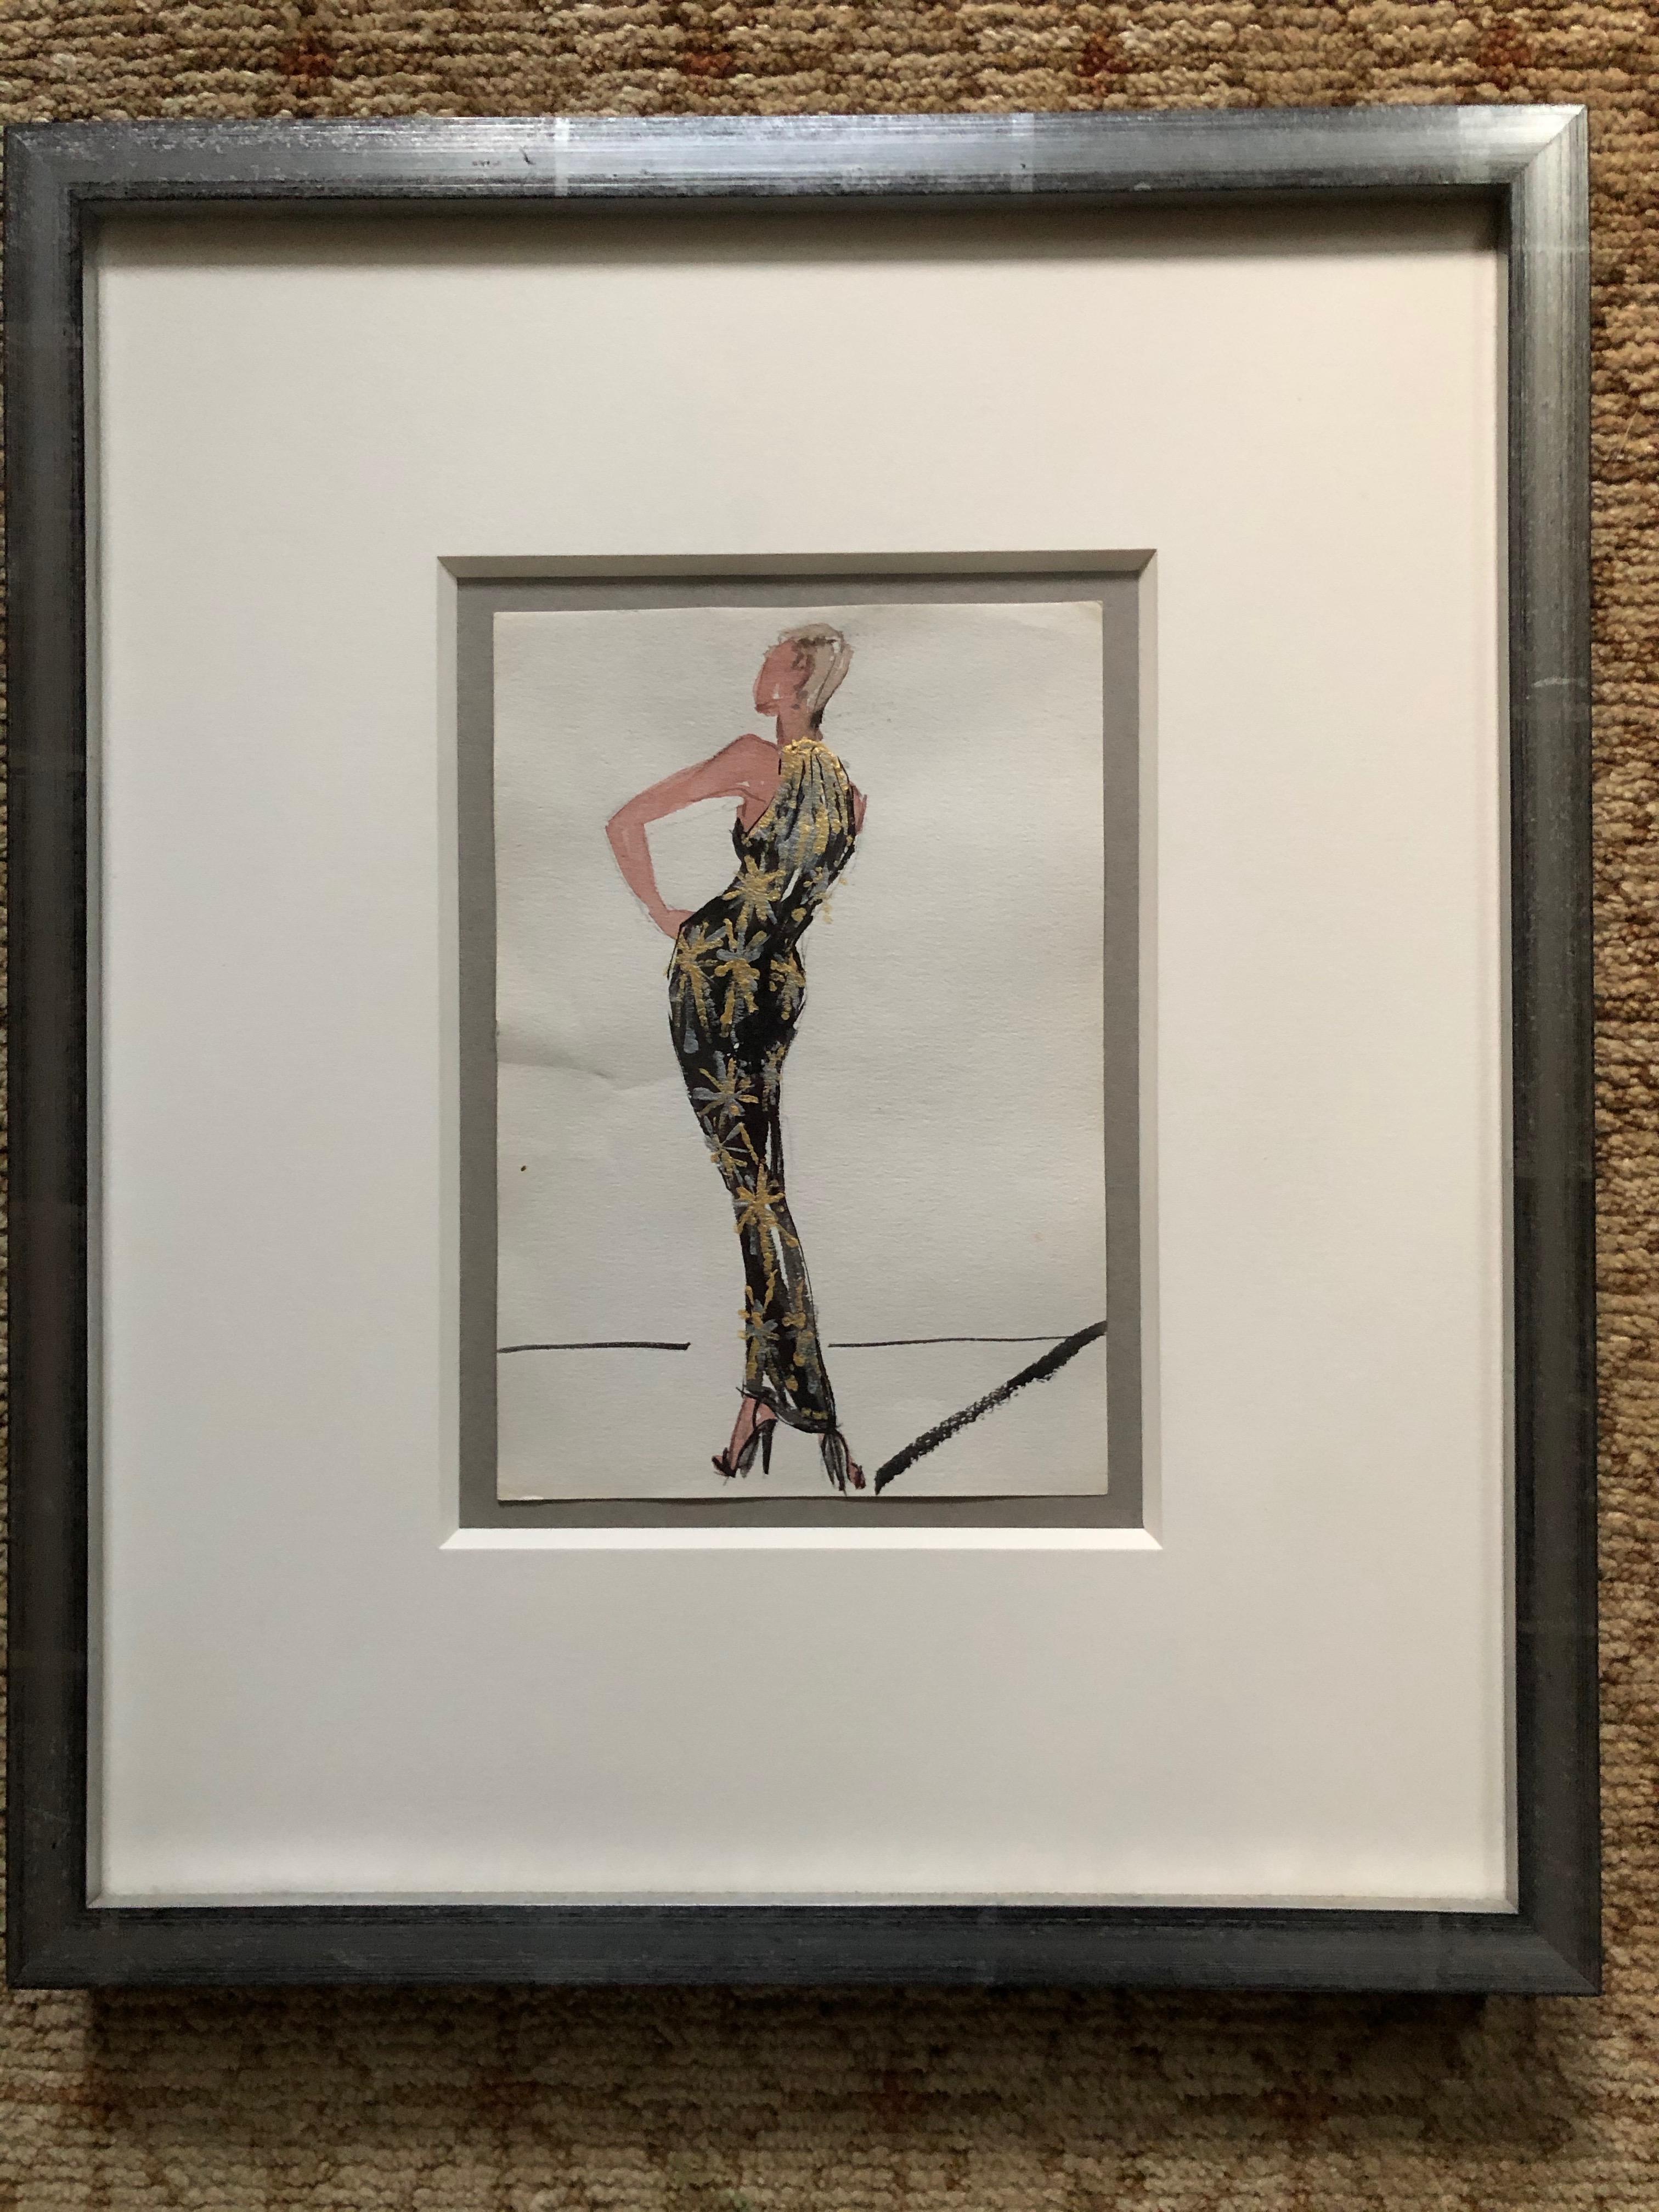 Halston 1983 Original Fashion Illustration Beaded Fireworks Evening Dress  by Sui Yee.
Halston was unique in that he had each design illustrated by an in house artist.
Joe Eula captured the spirit beautifully until 1980, and another talented artist